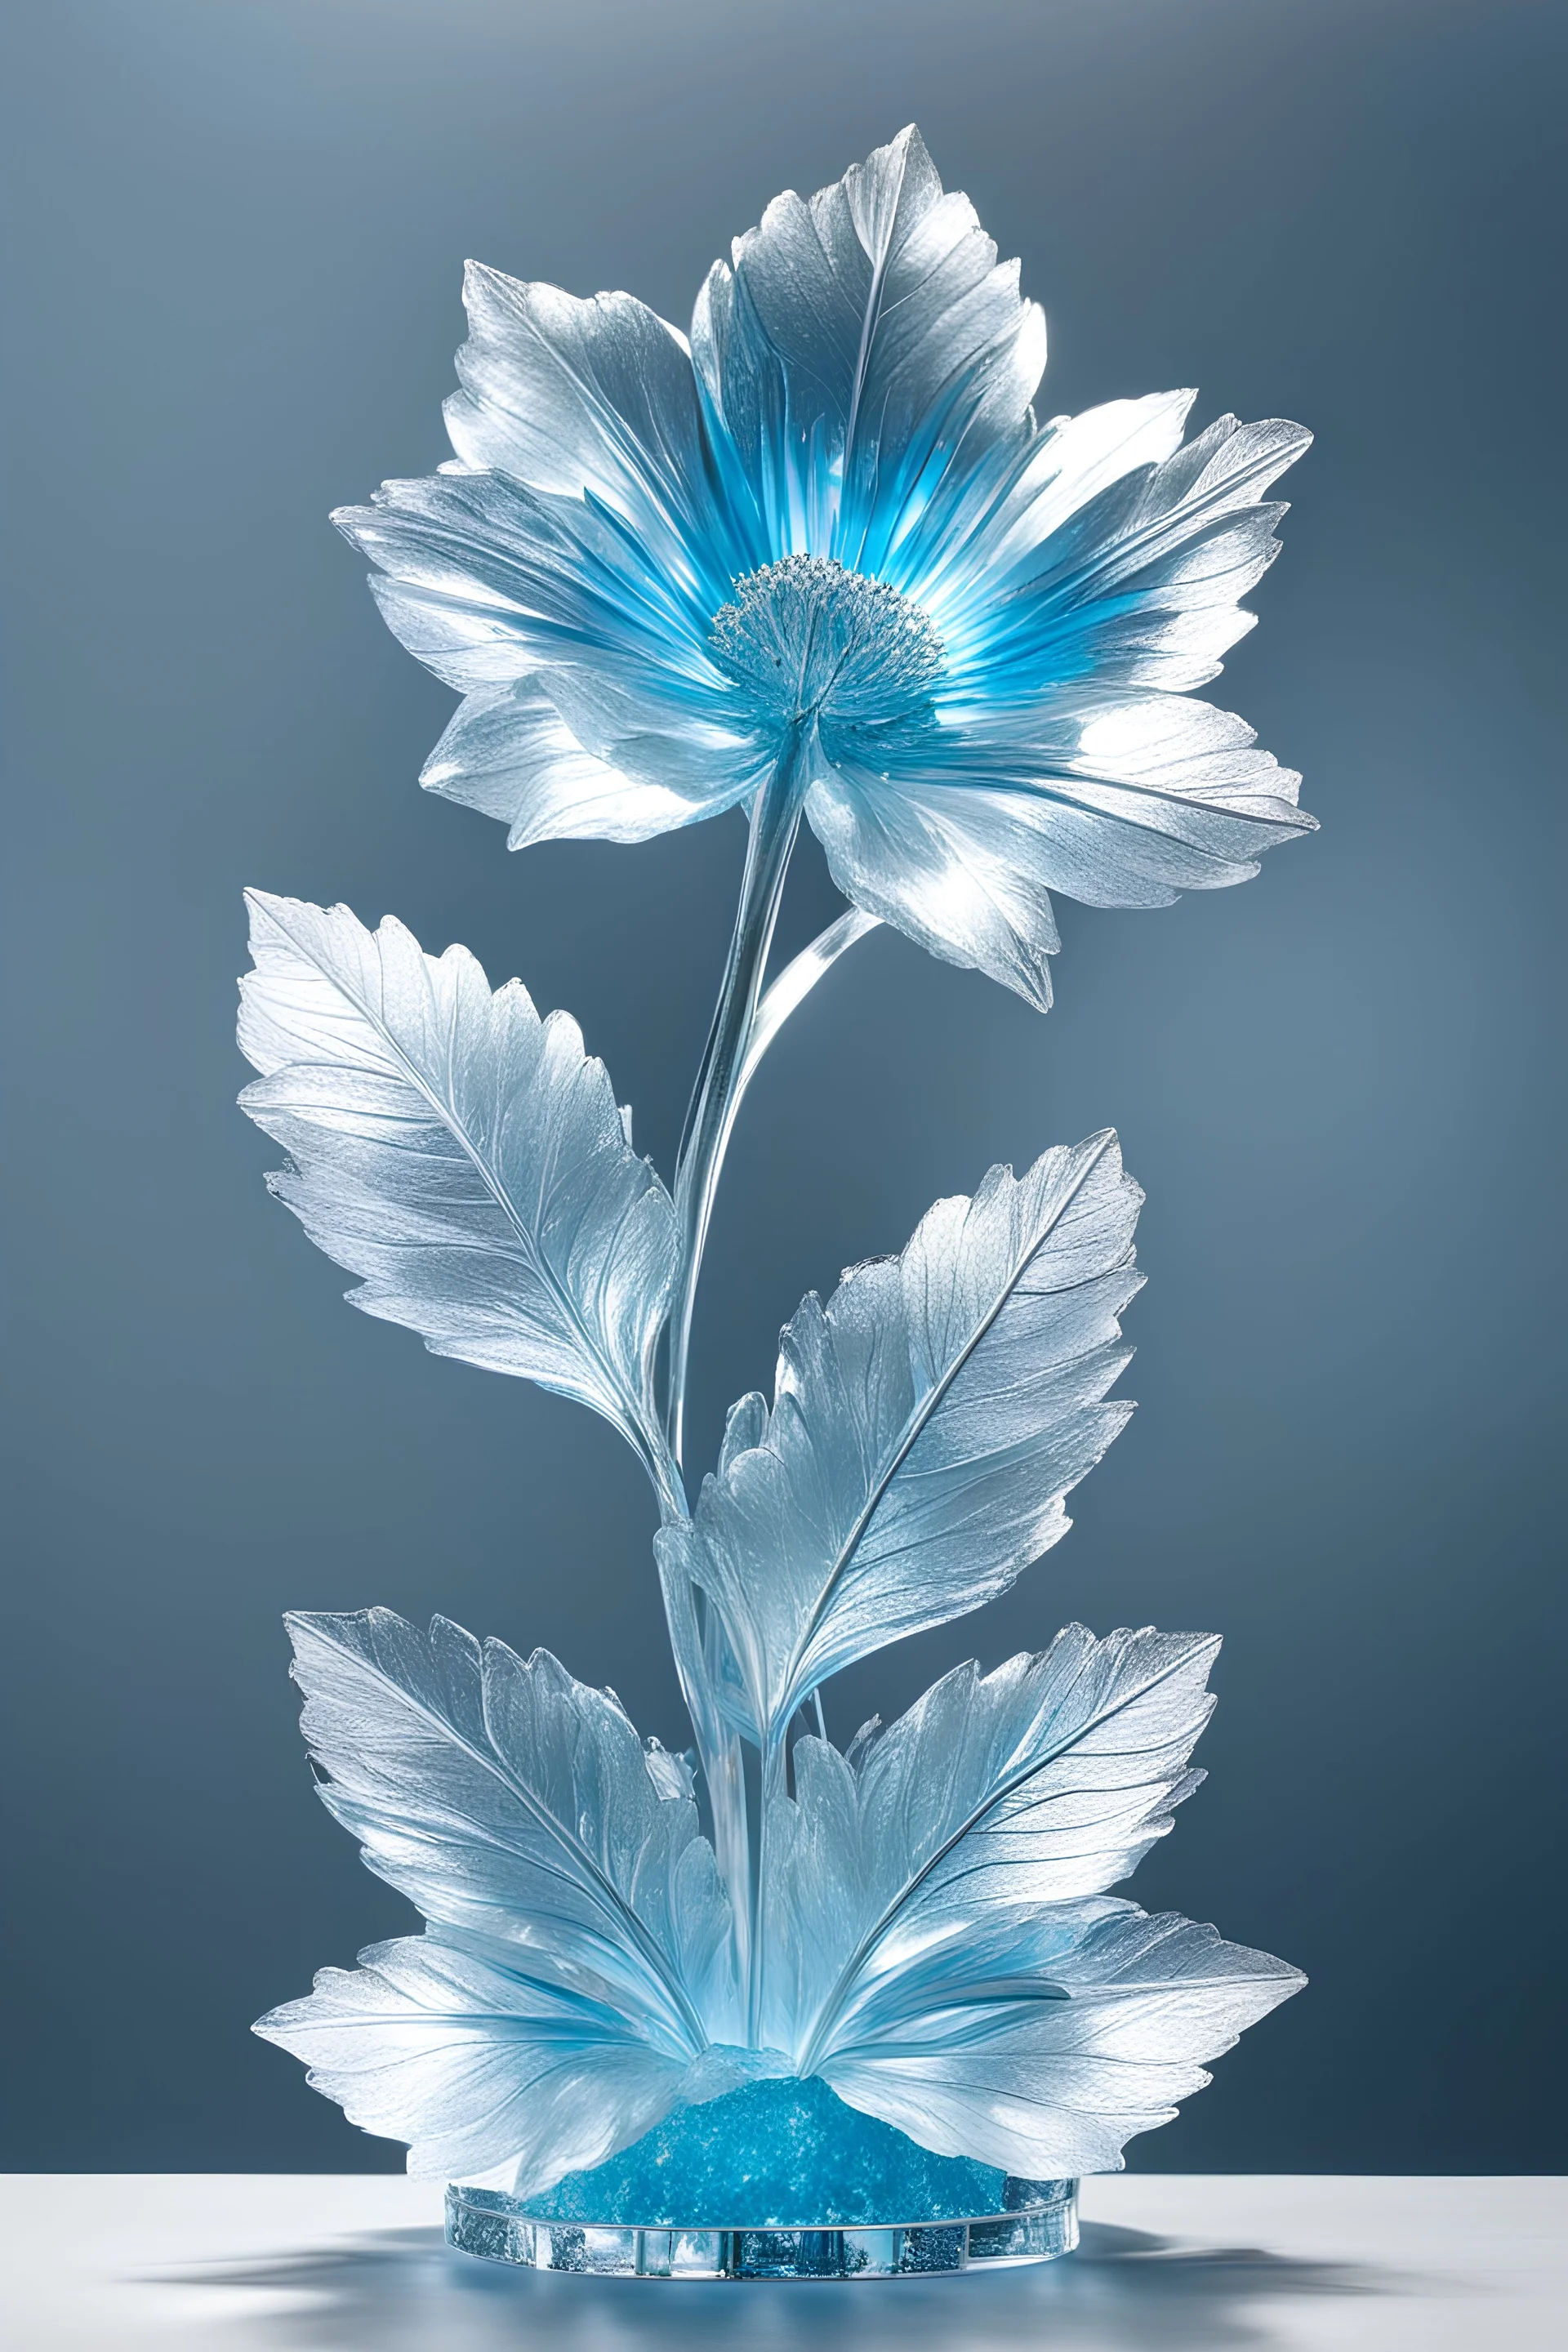 Hyper-realistic sculpture ice sculpture a bright ice flower in sky blue silver background